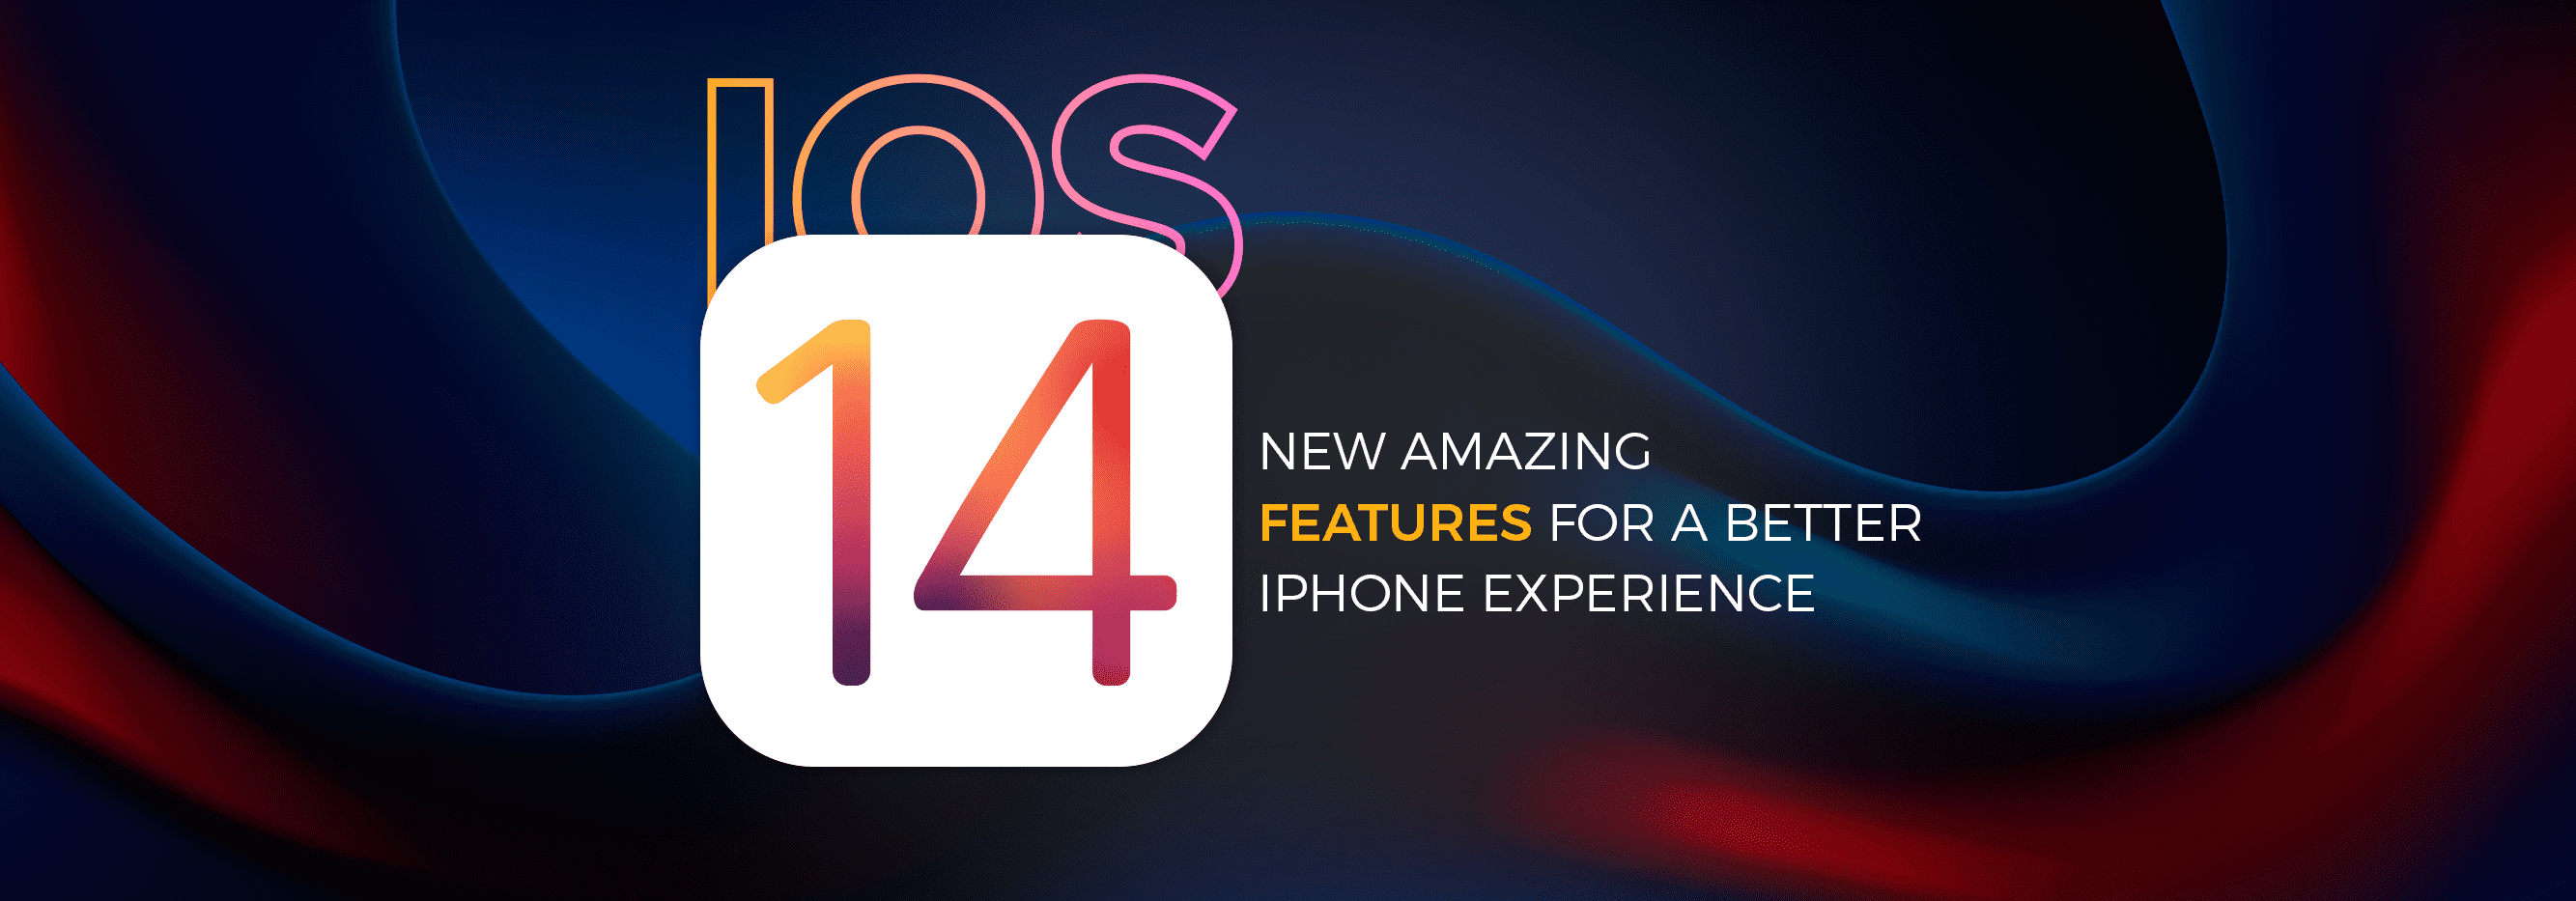 iOS 14 – New Amazing Features For a Better iPhone Experience_banner